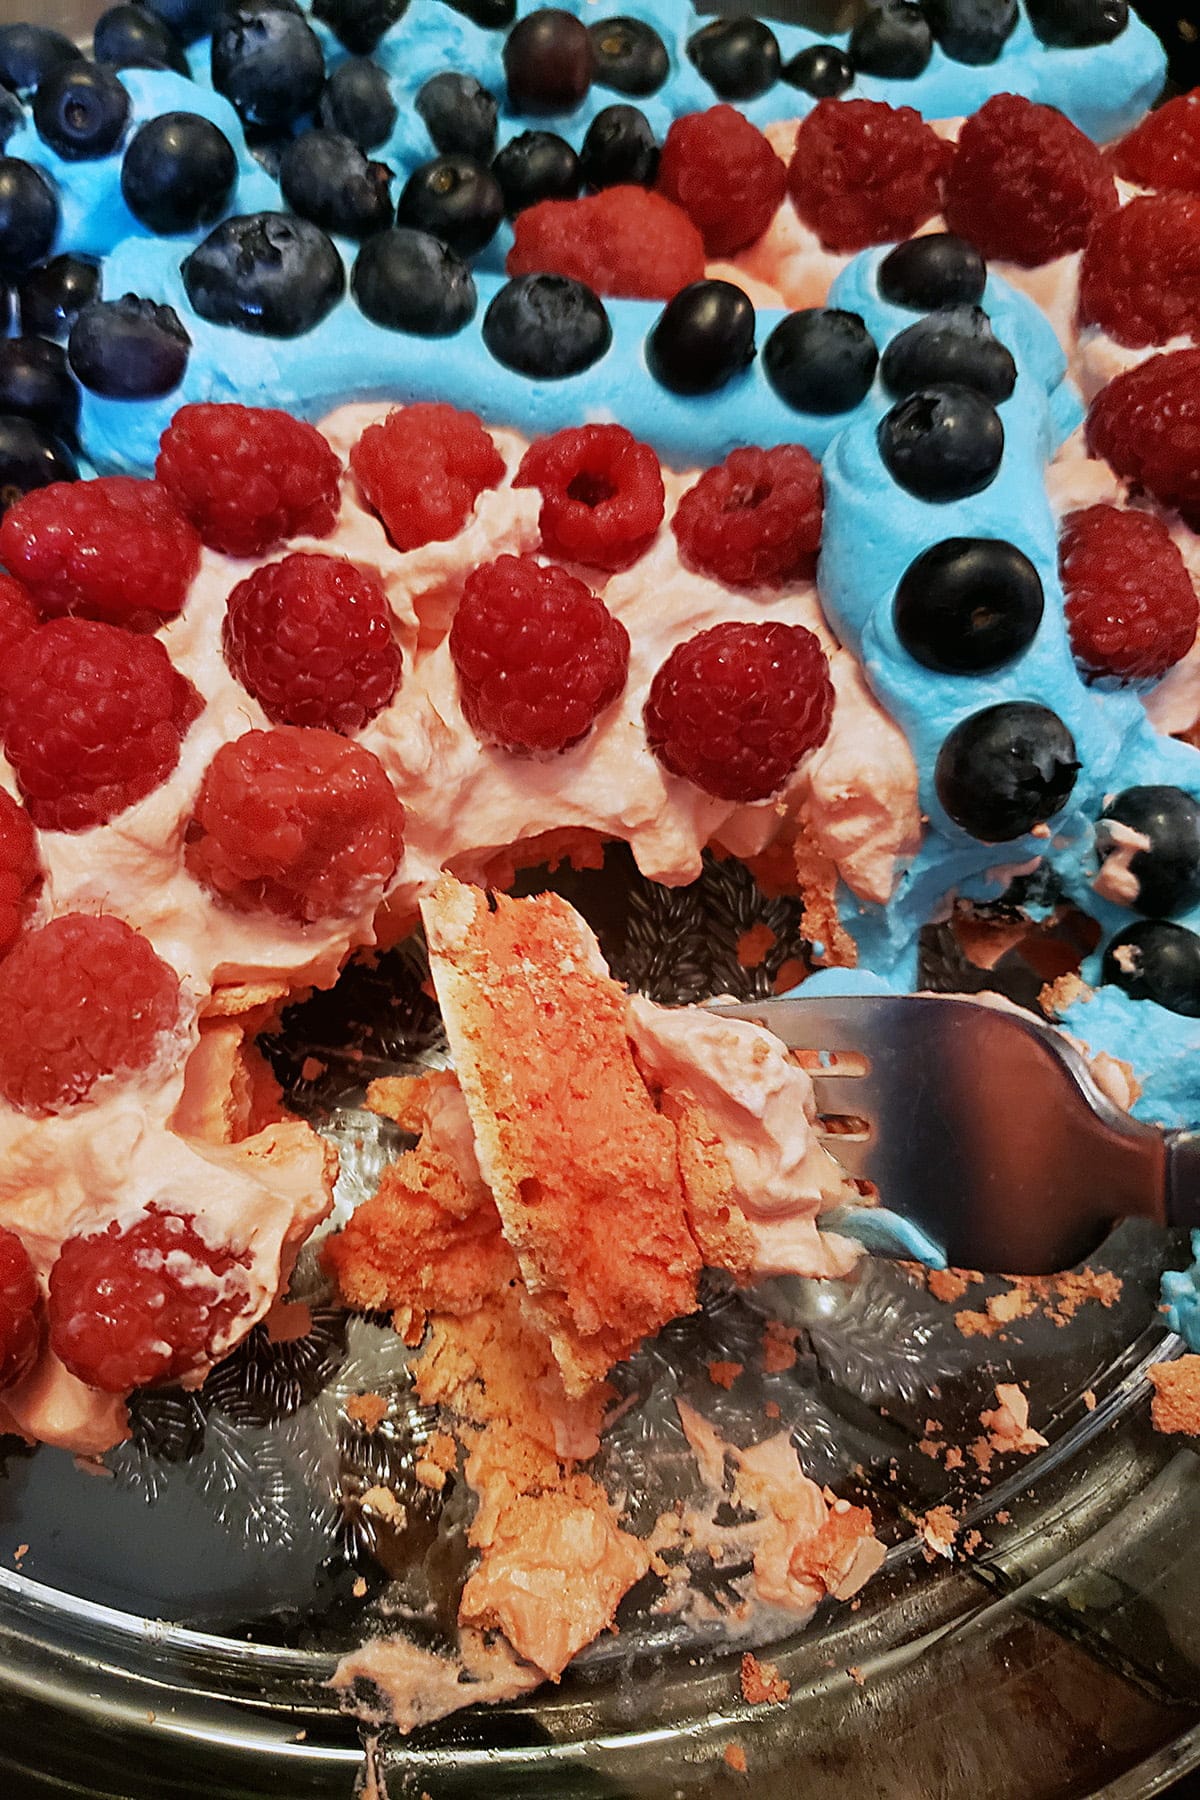 A close up view of a partially eaten red and blue pavlova, with raspberries and blueberries.